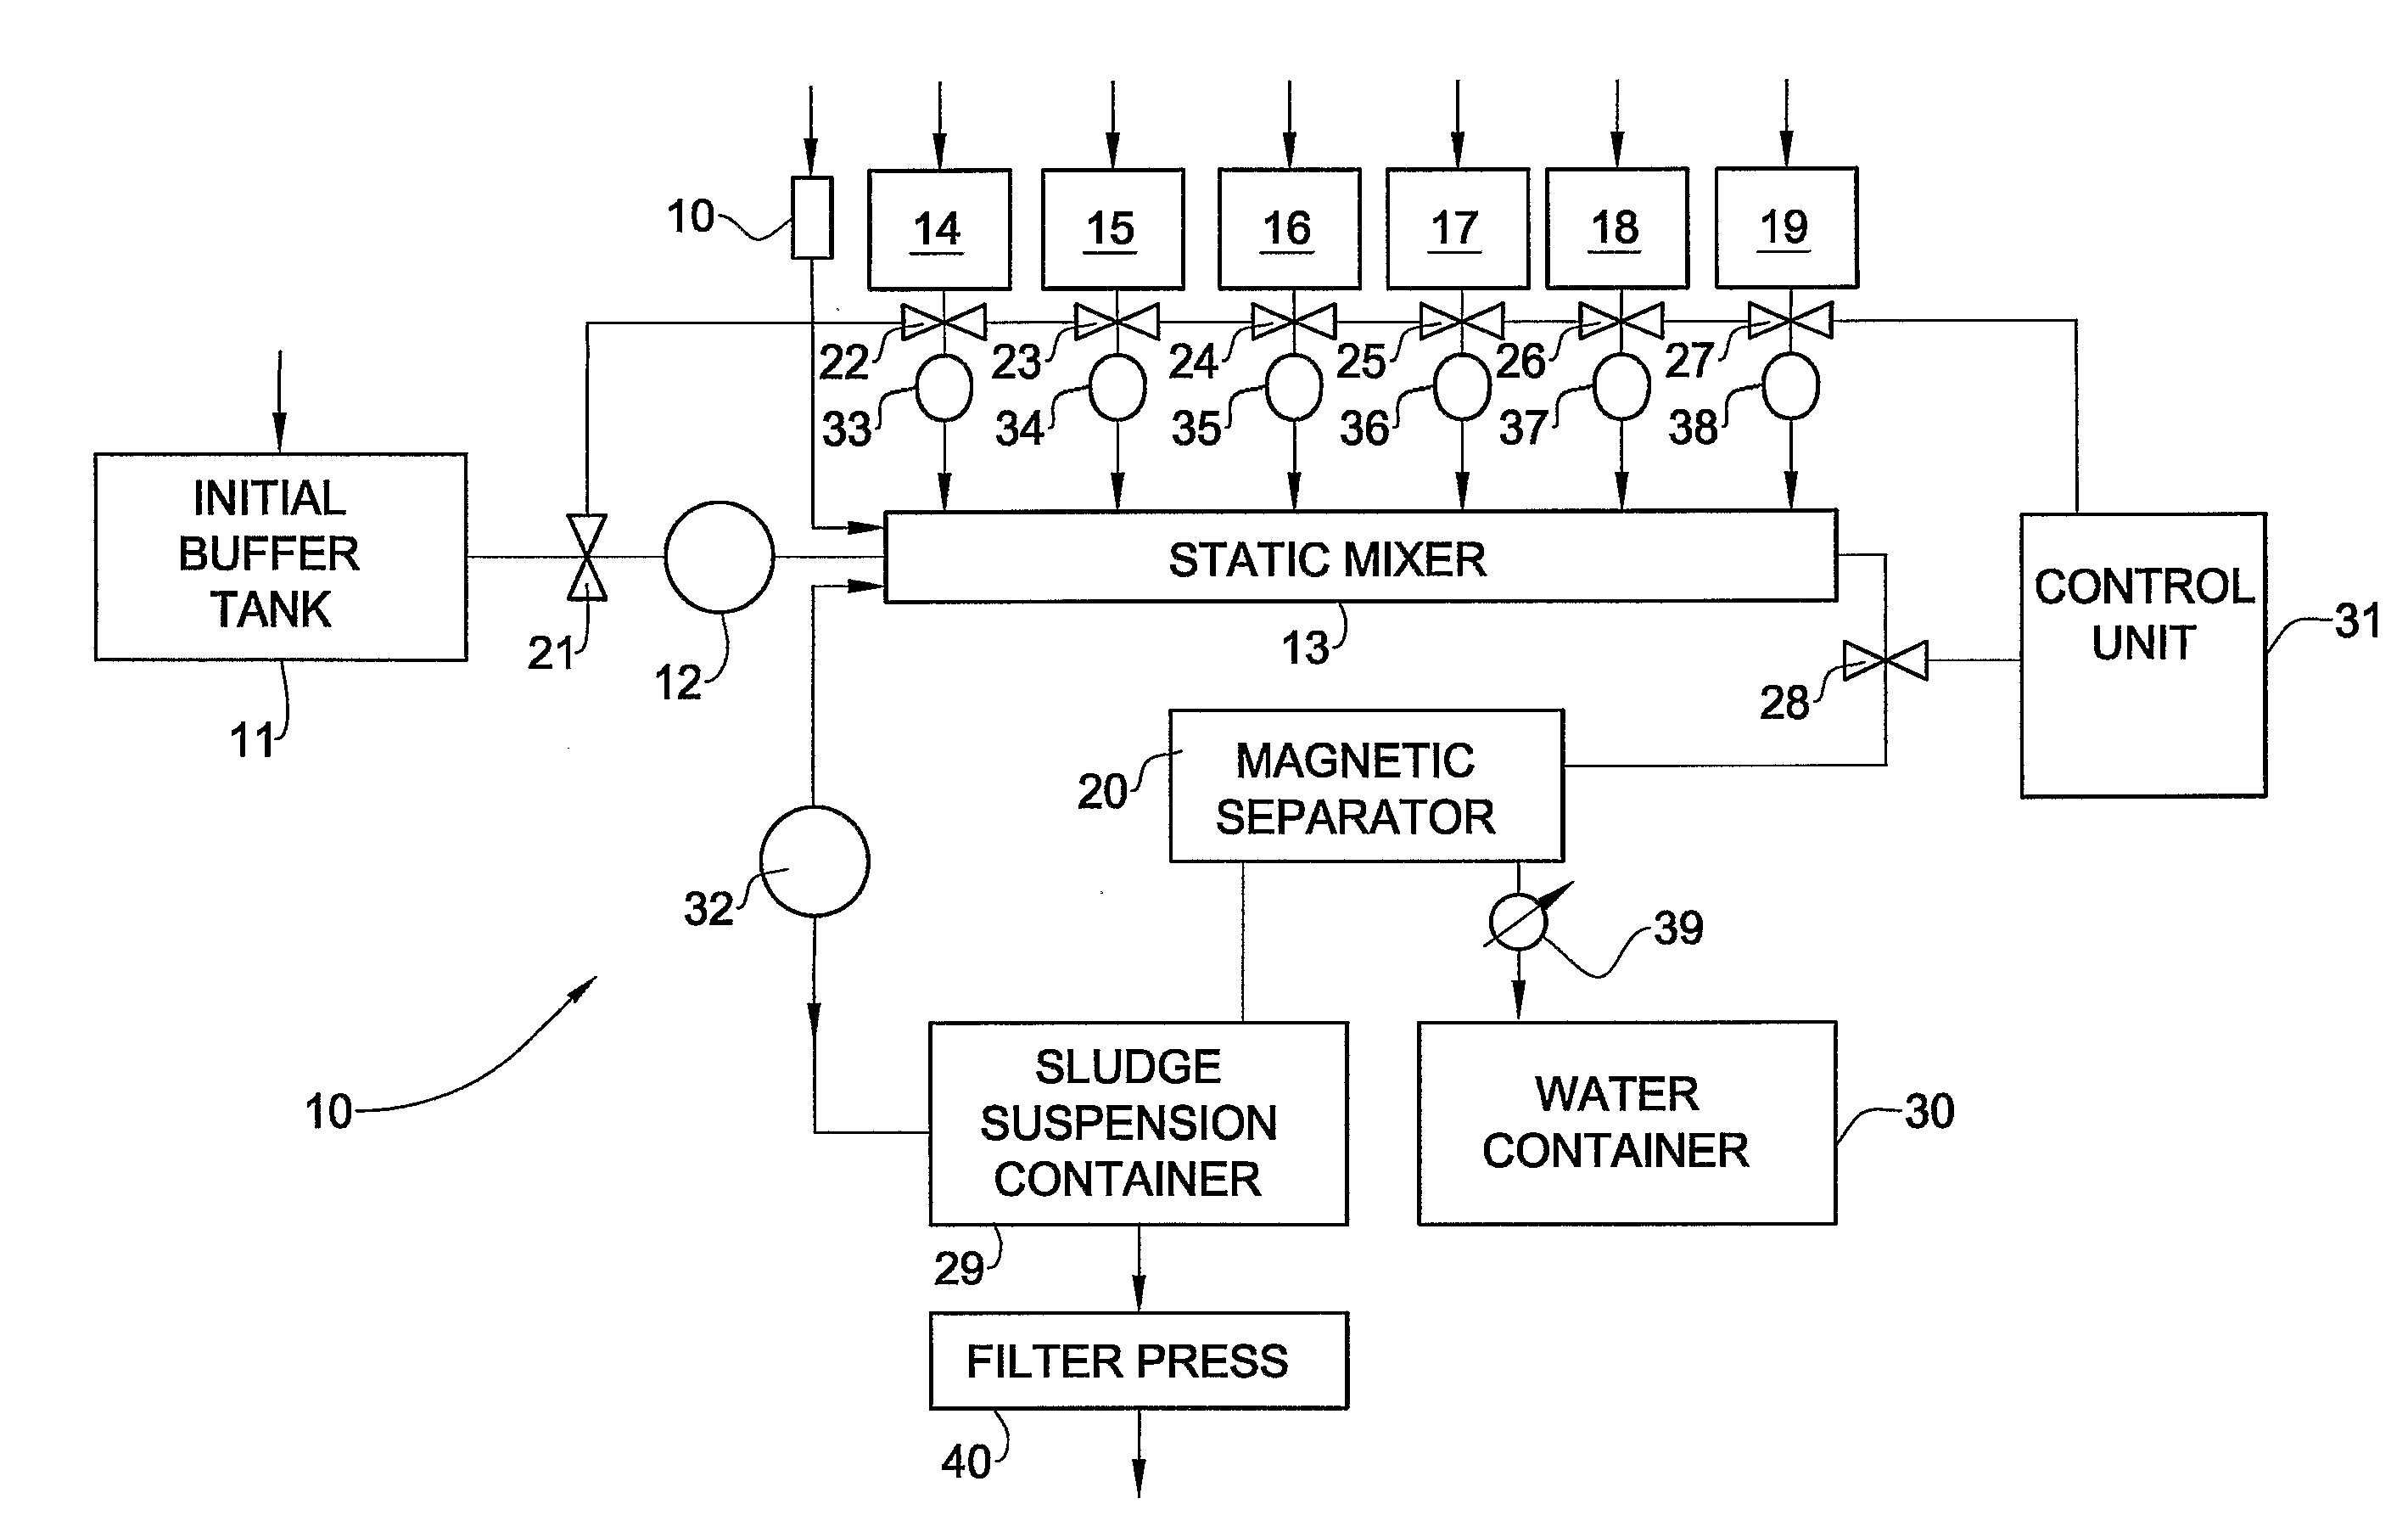 System and Method for Treatment of Industrial Wastewater